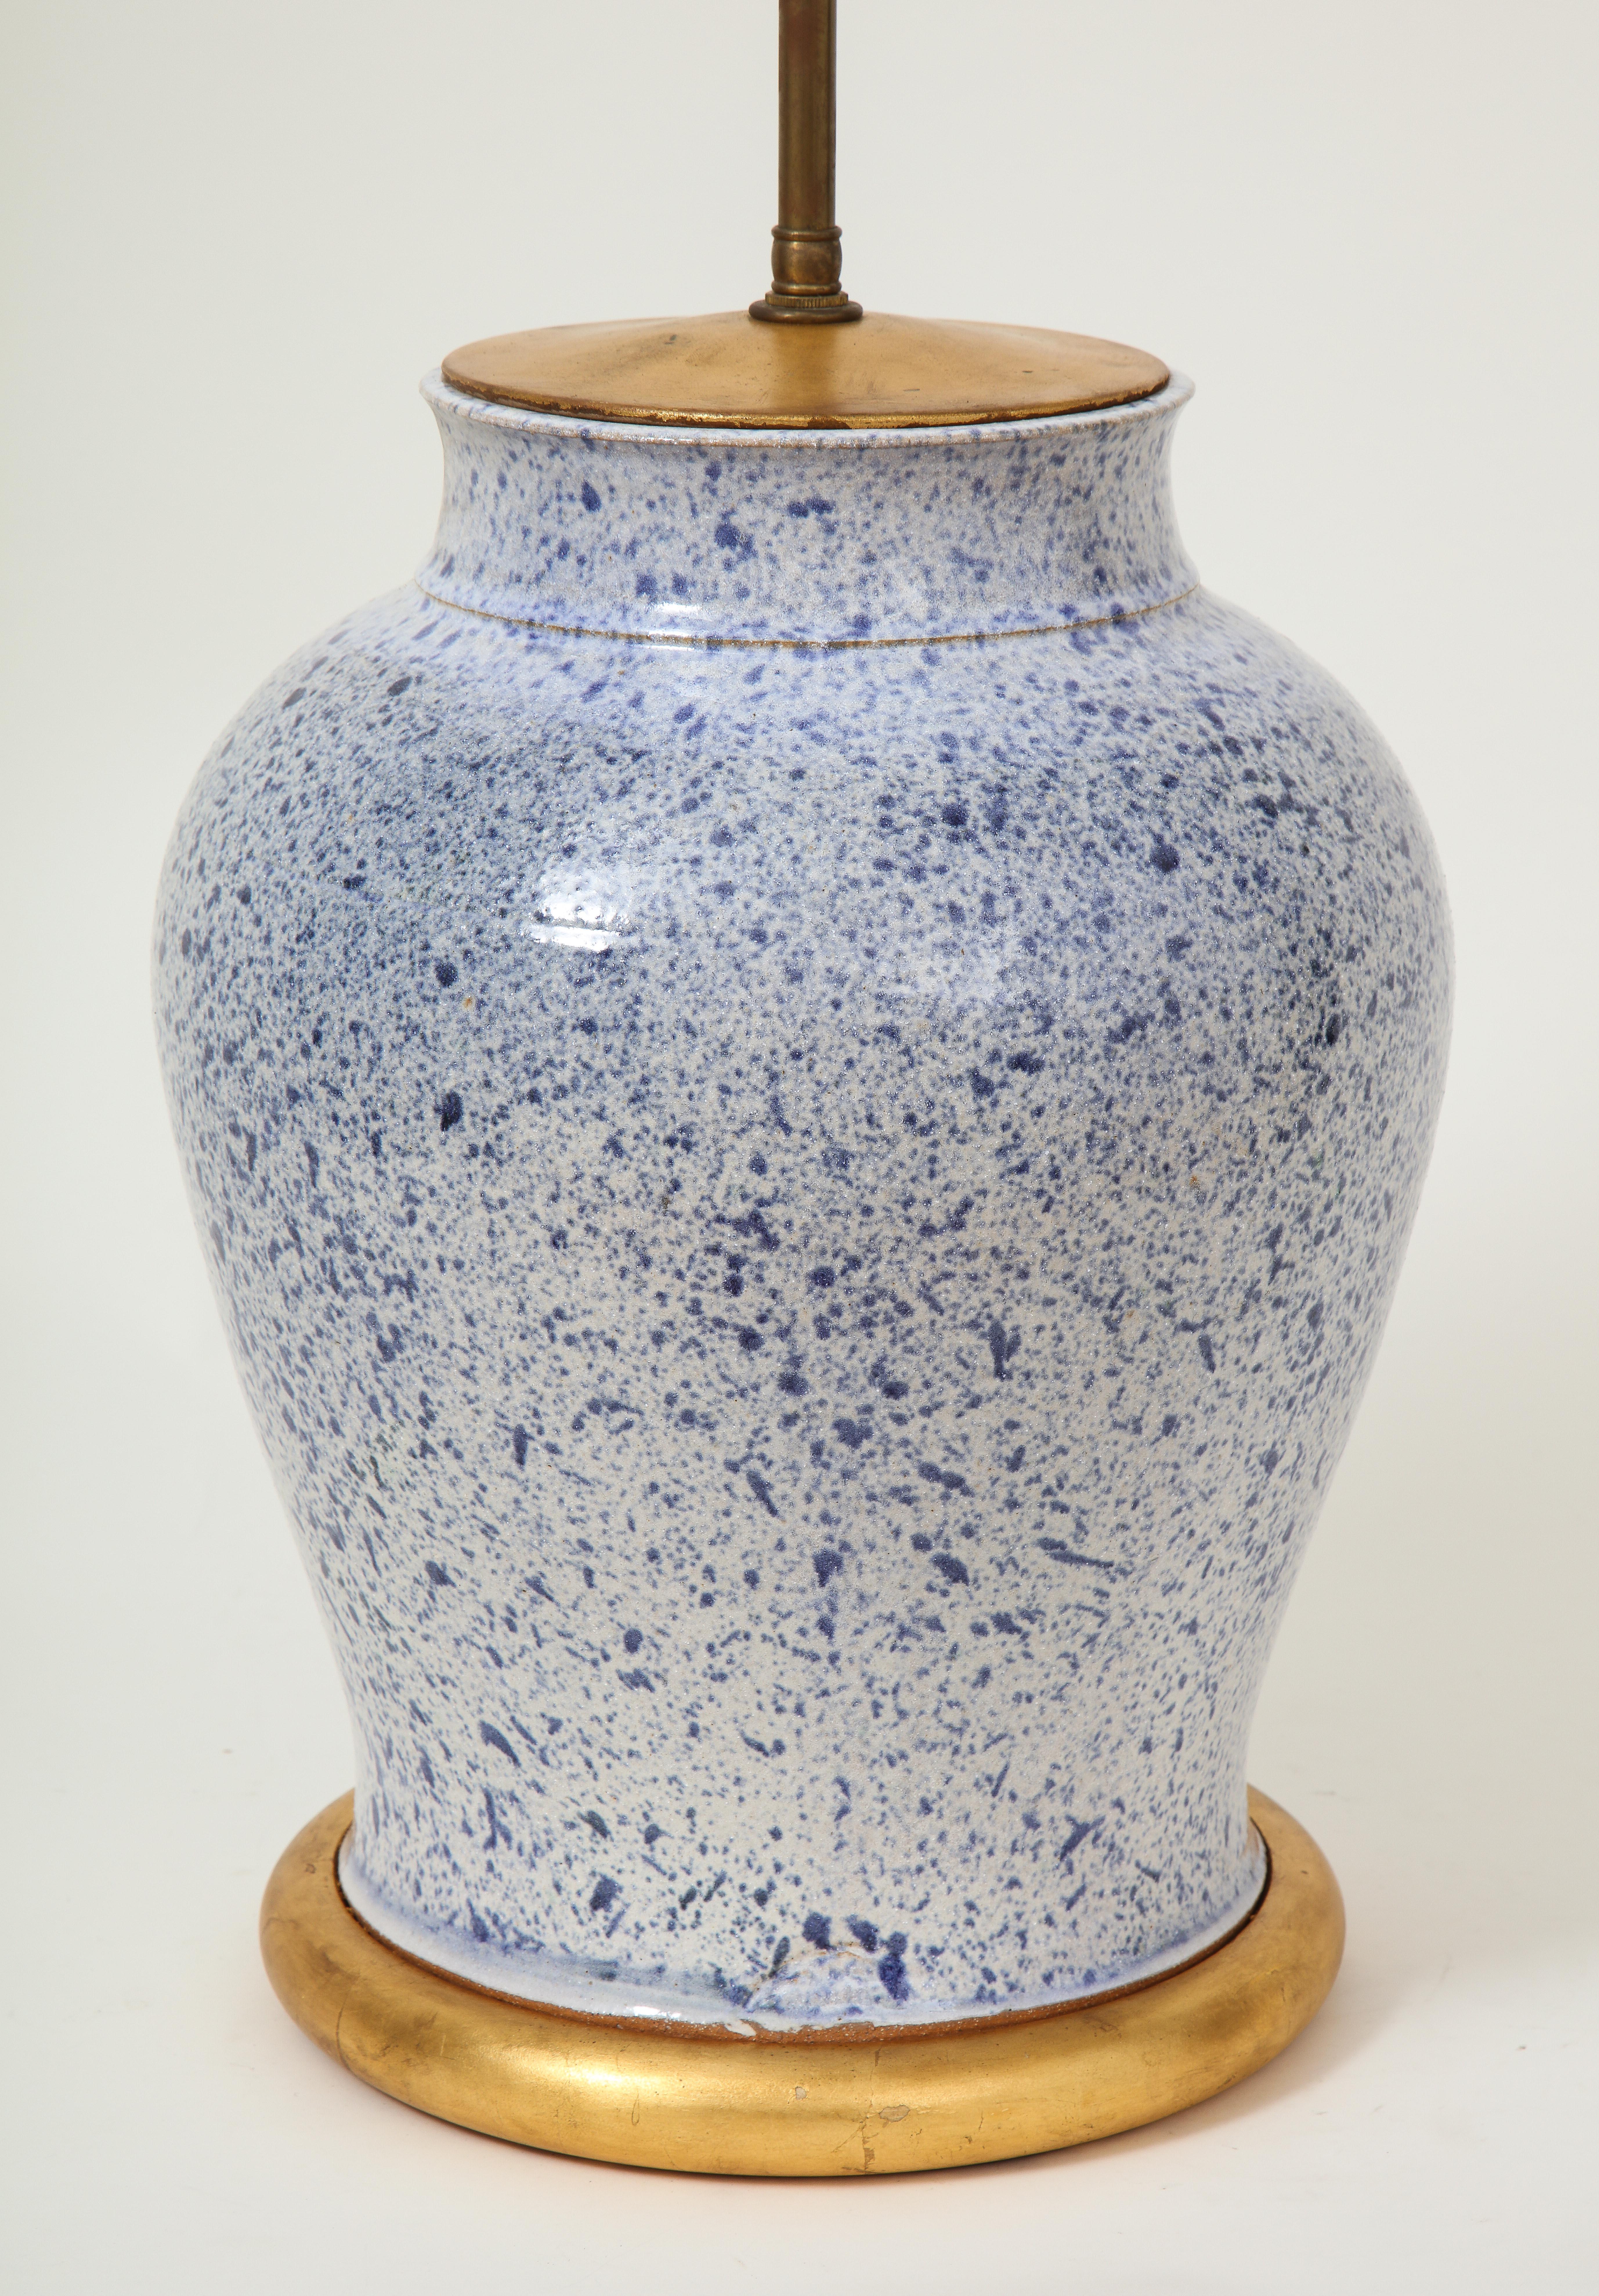 The baluster form ceramic base spattered overall in blue glaze; mounted on a gilt base; fitted with an adjustable rod and two light sockets. Height to top of vase is 15.5